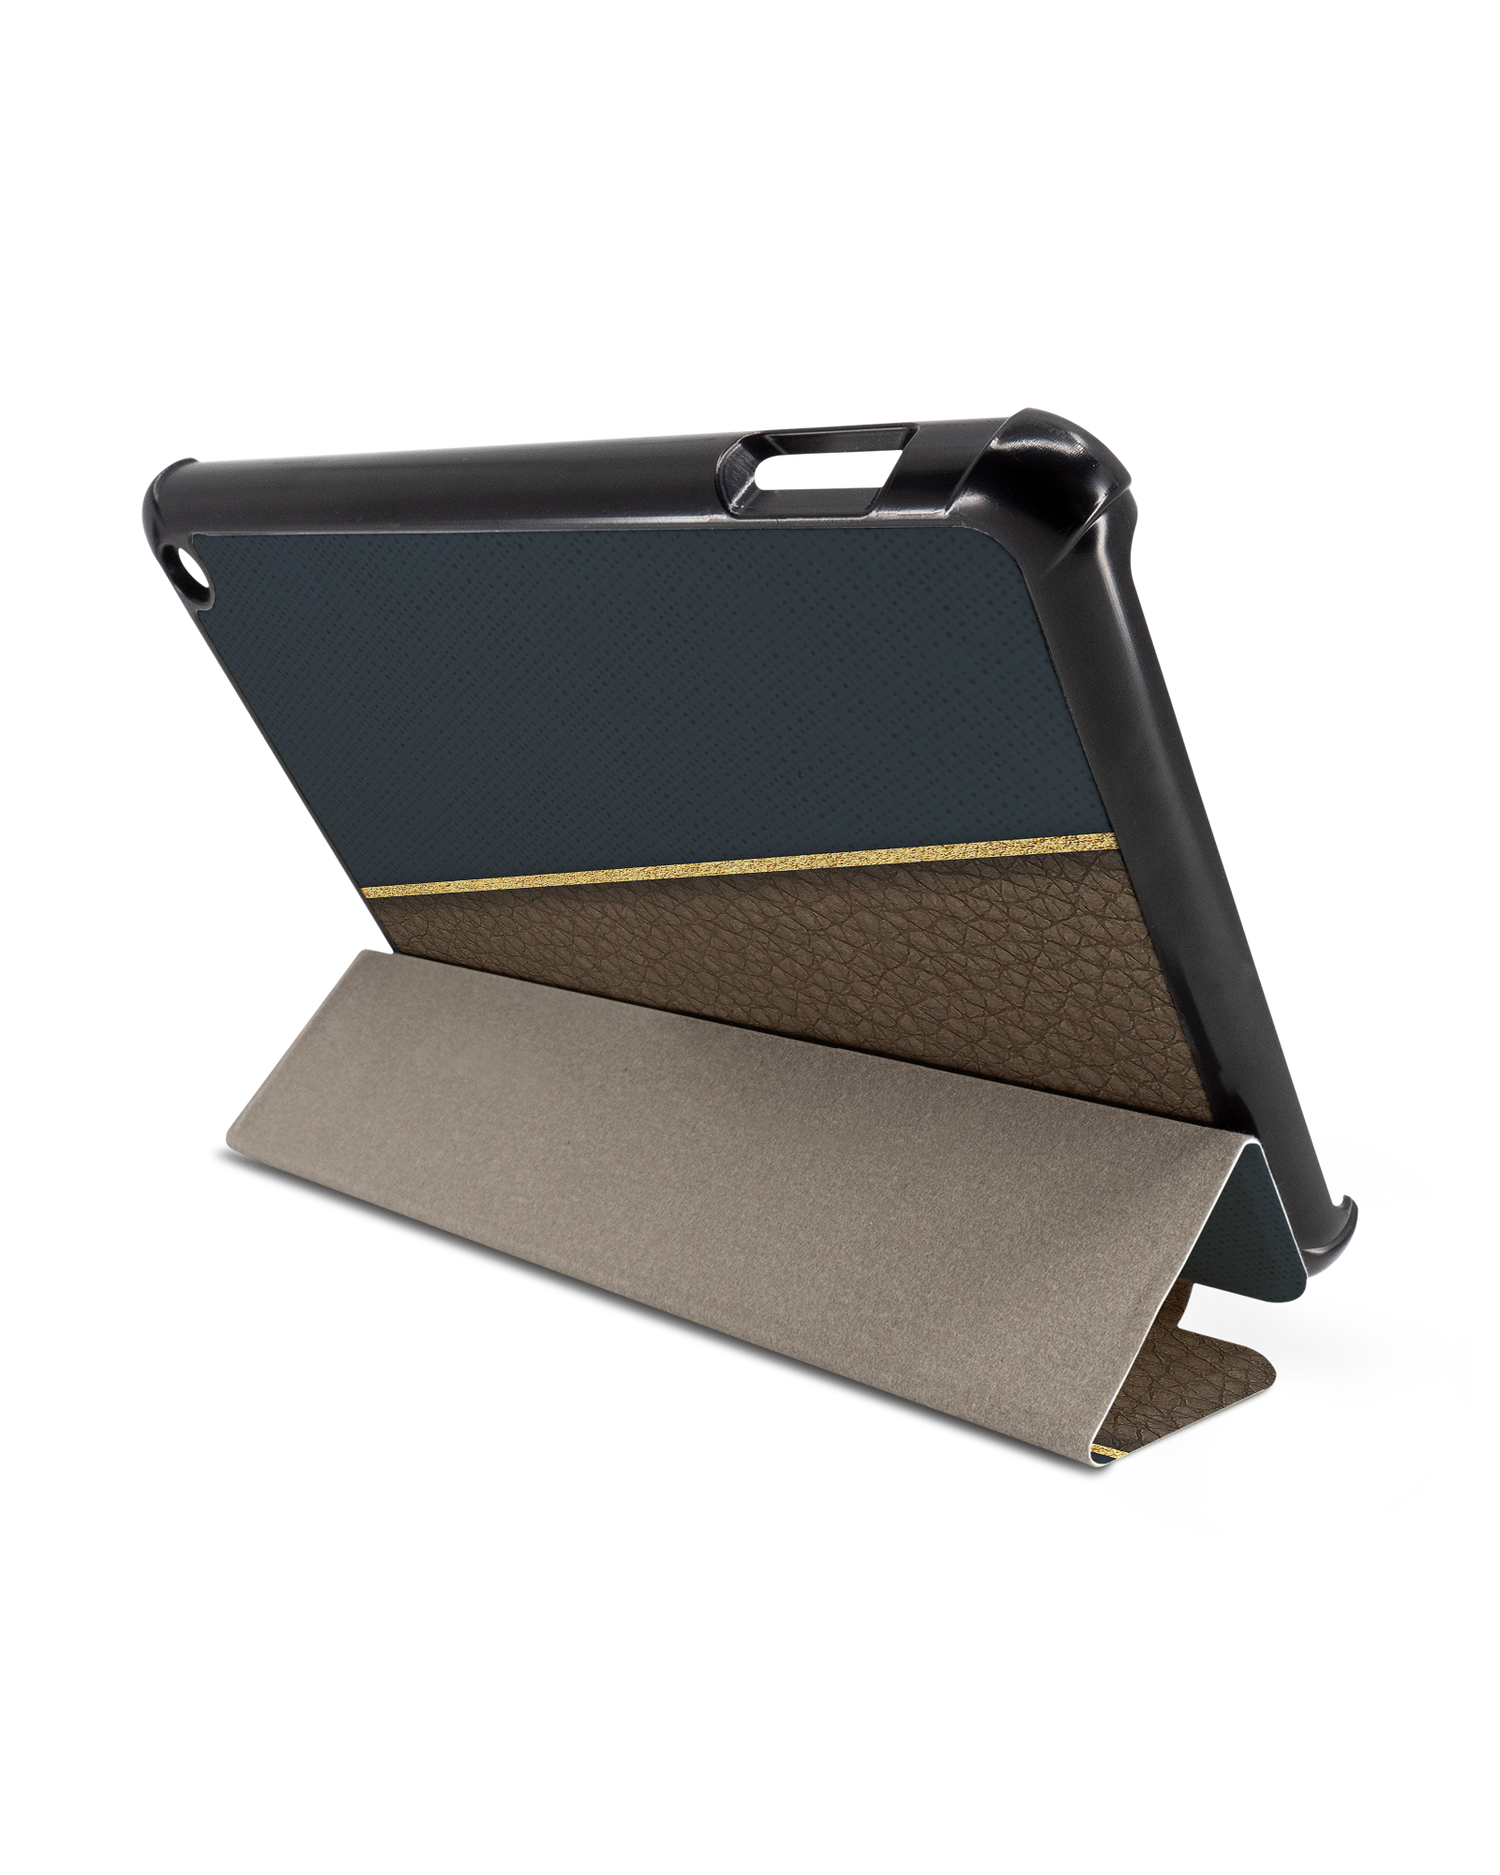 Oxford Tablet Smart Case for Amazon Fire 7 (2022): Used as Stand